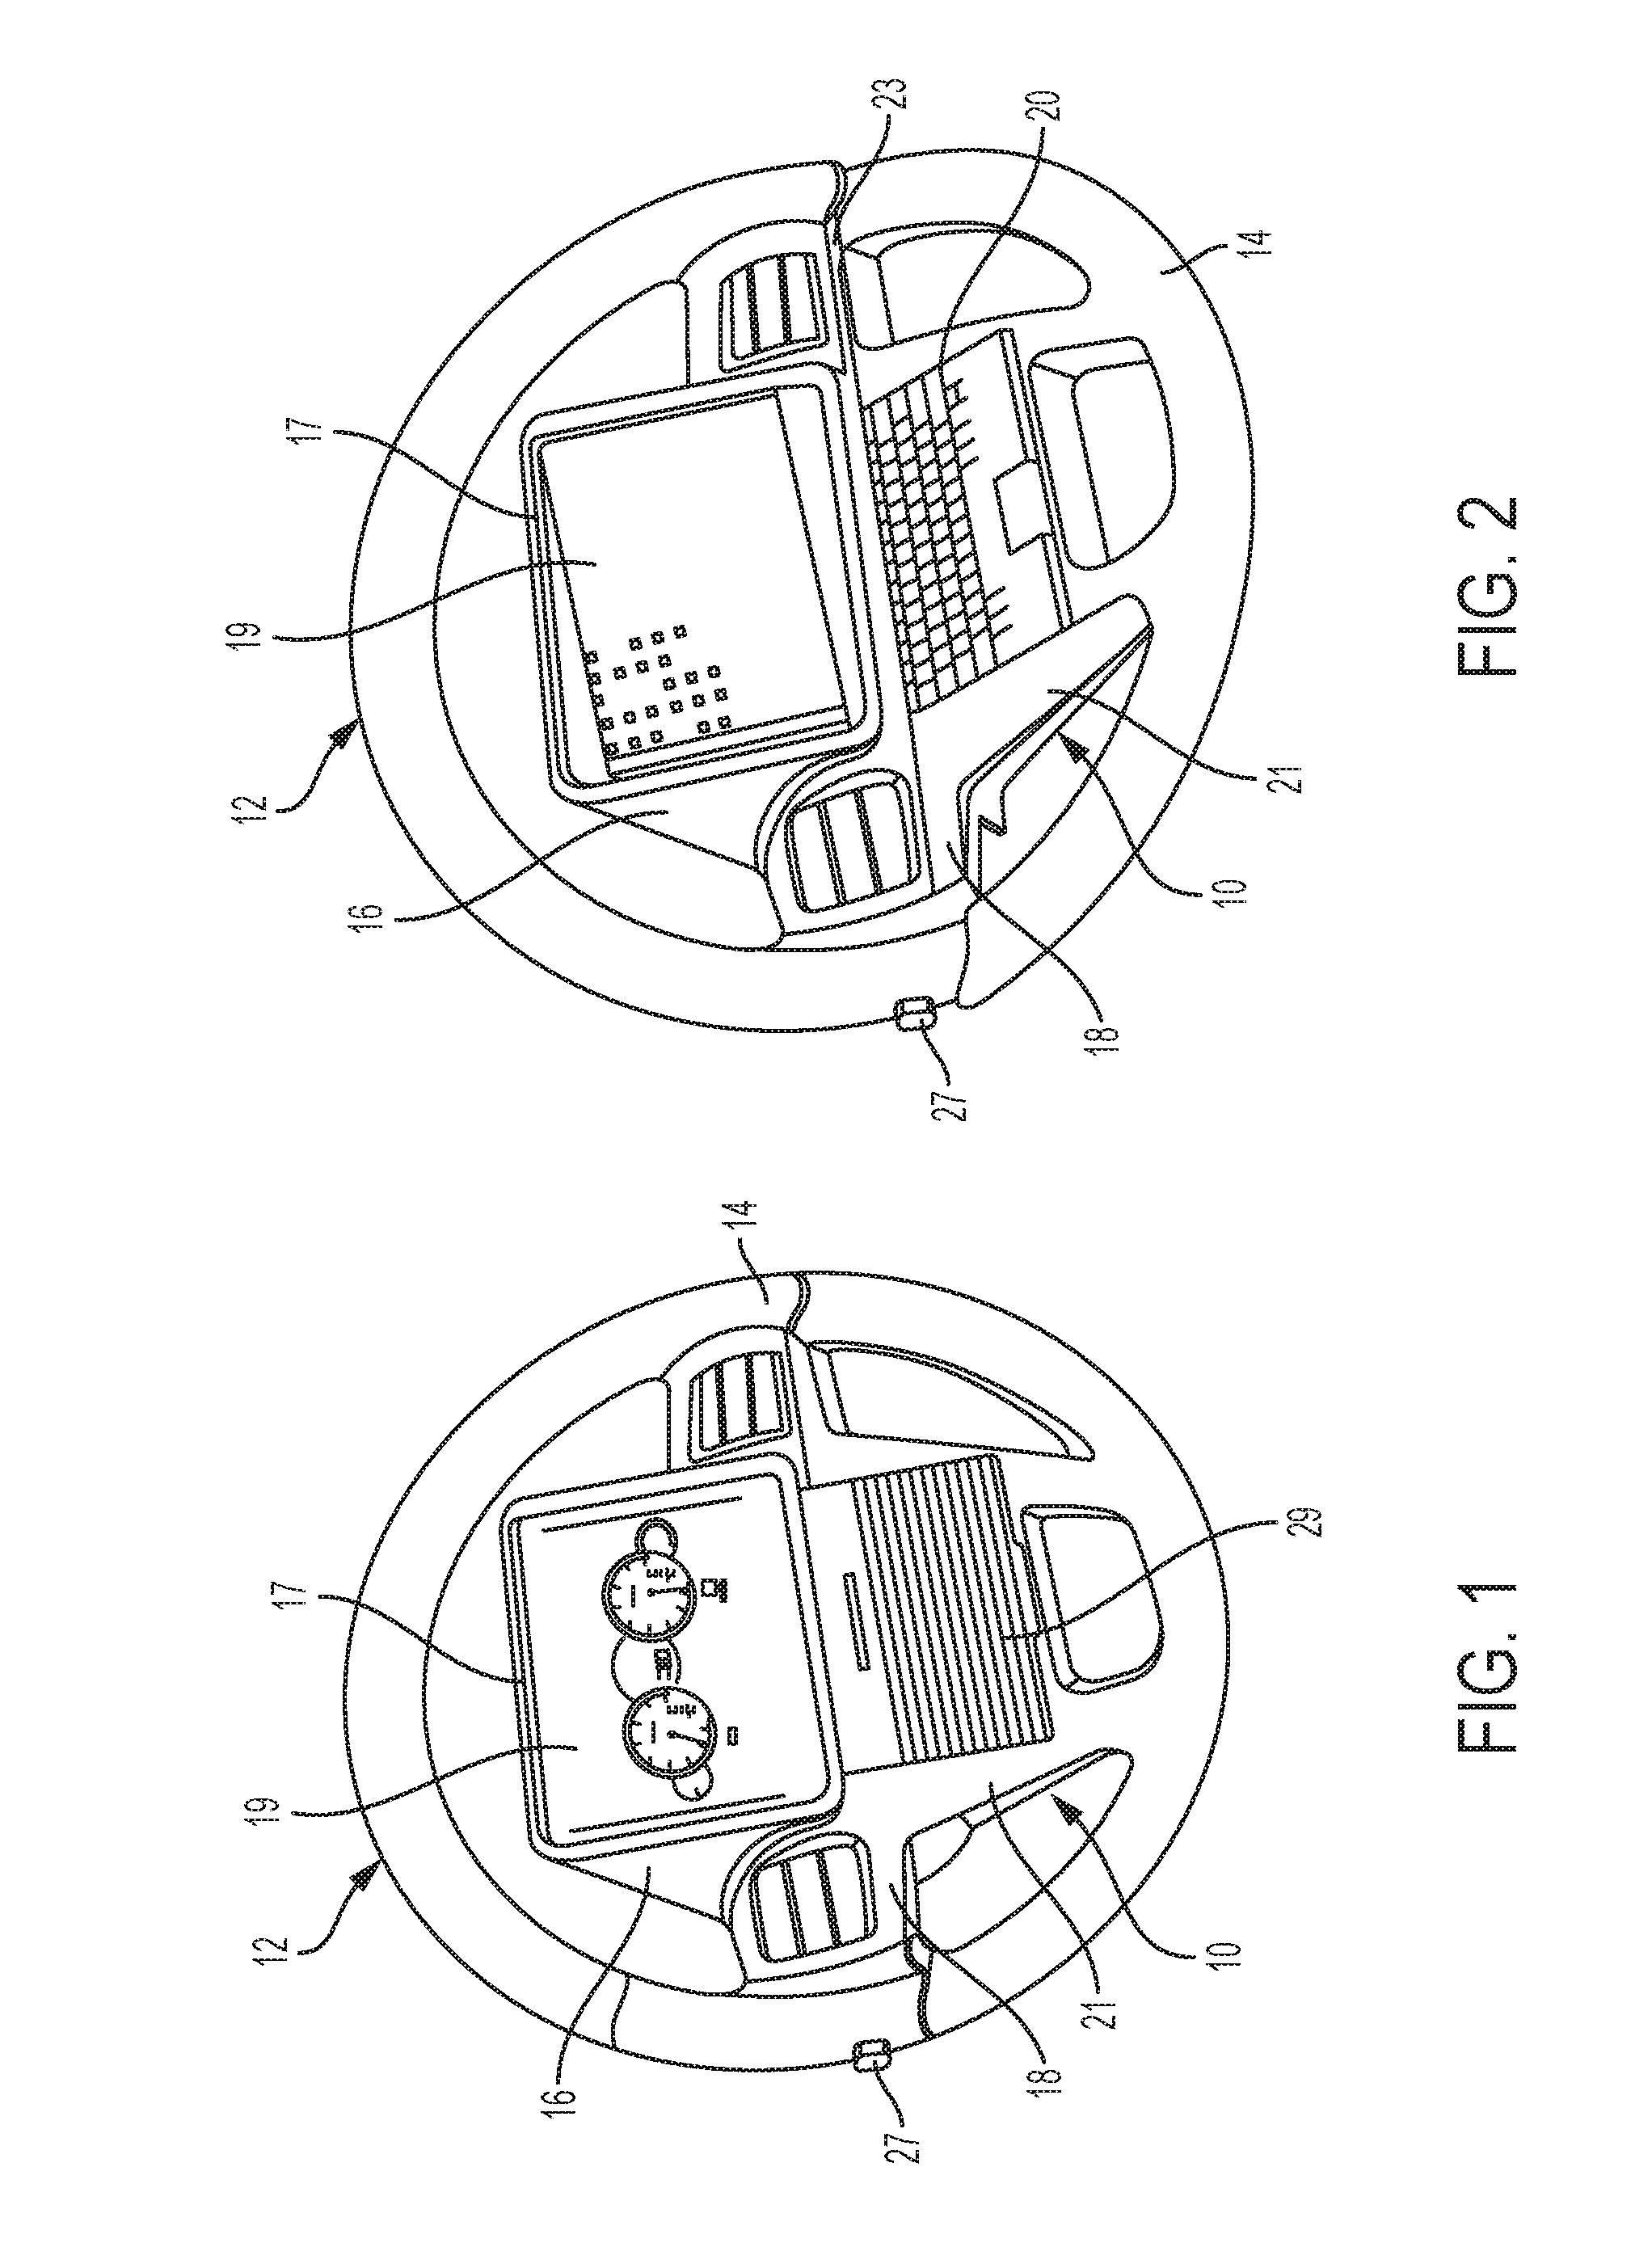 Steering wheel with integrated keyboard assembly